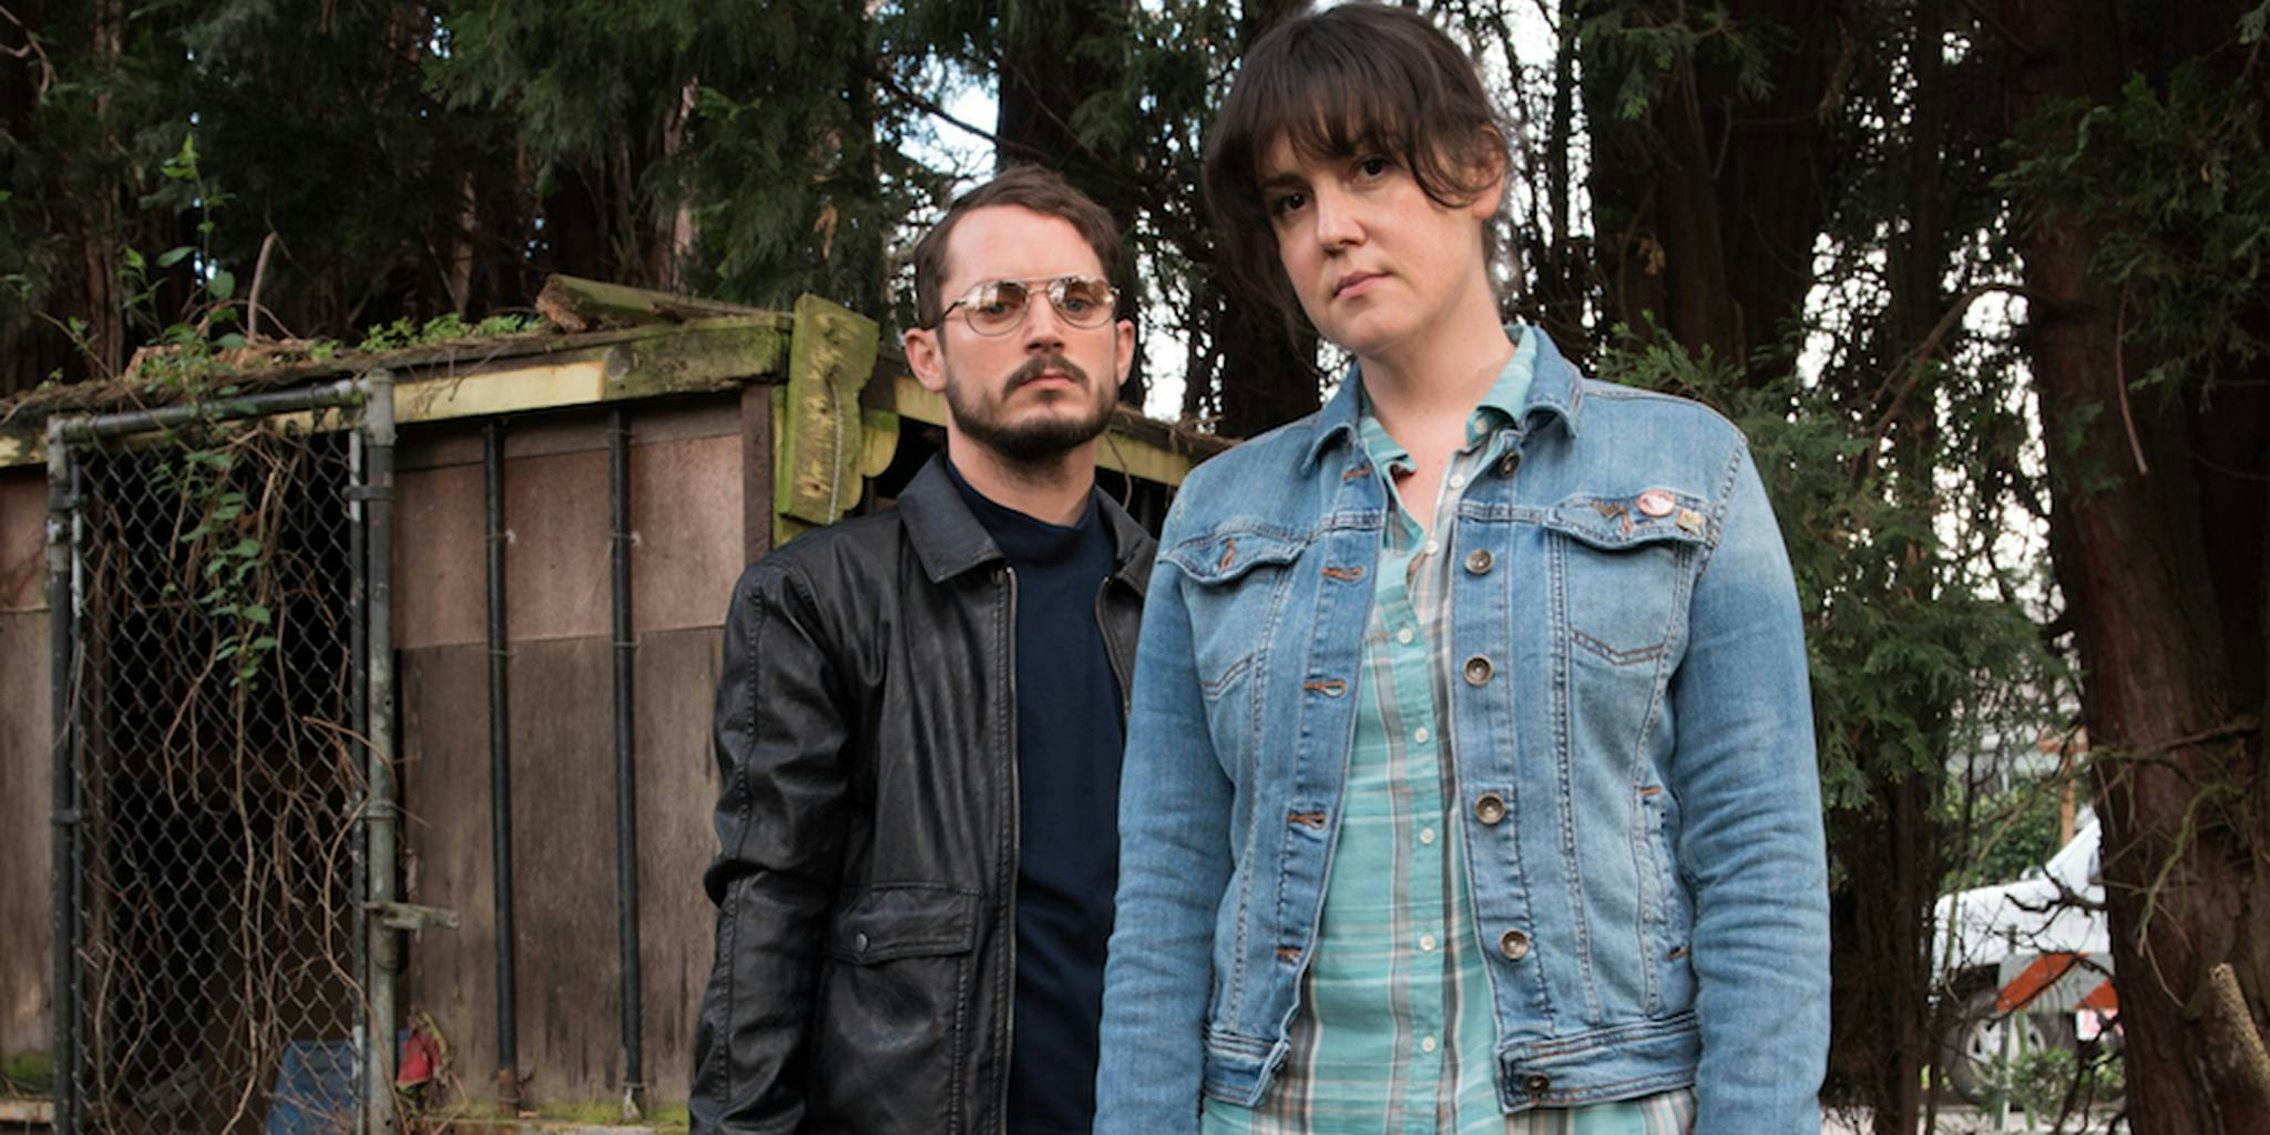 best comedy movies thrillers on netflix: I Don’t Feel at Home in This World Anymore